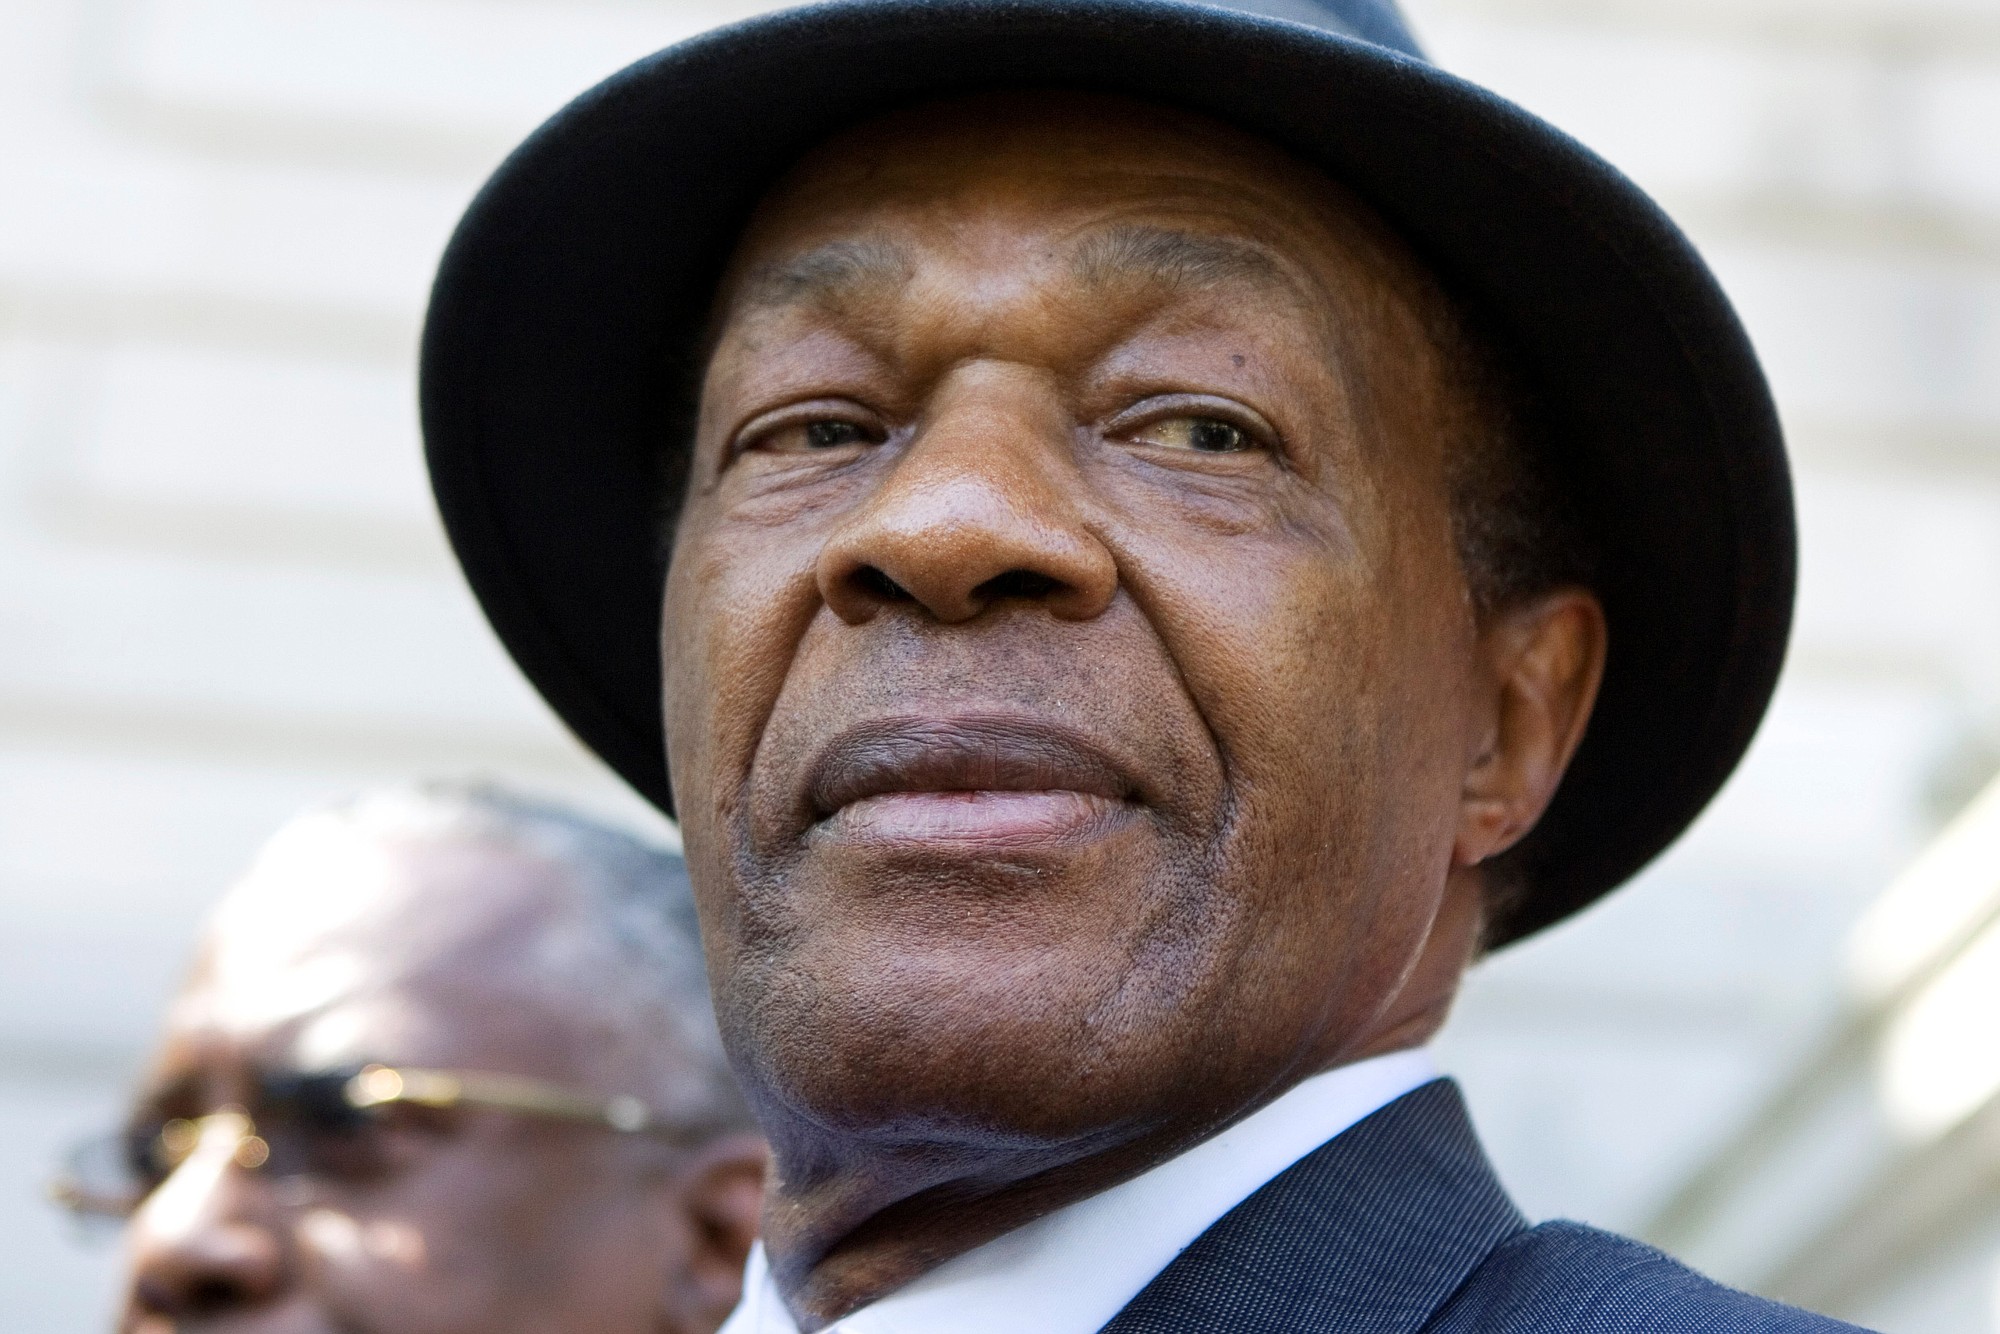 Former District of Columbia Mayor Marion Barry attends a news conference  July 6, 2009in Washington. Barry, who staged comeback after a 1990 crack cocaine arrest, died early Sunday morning.